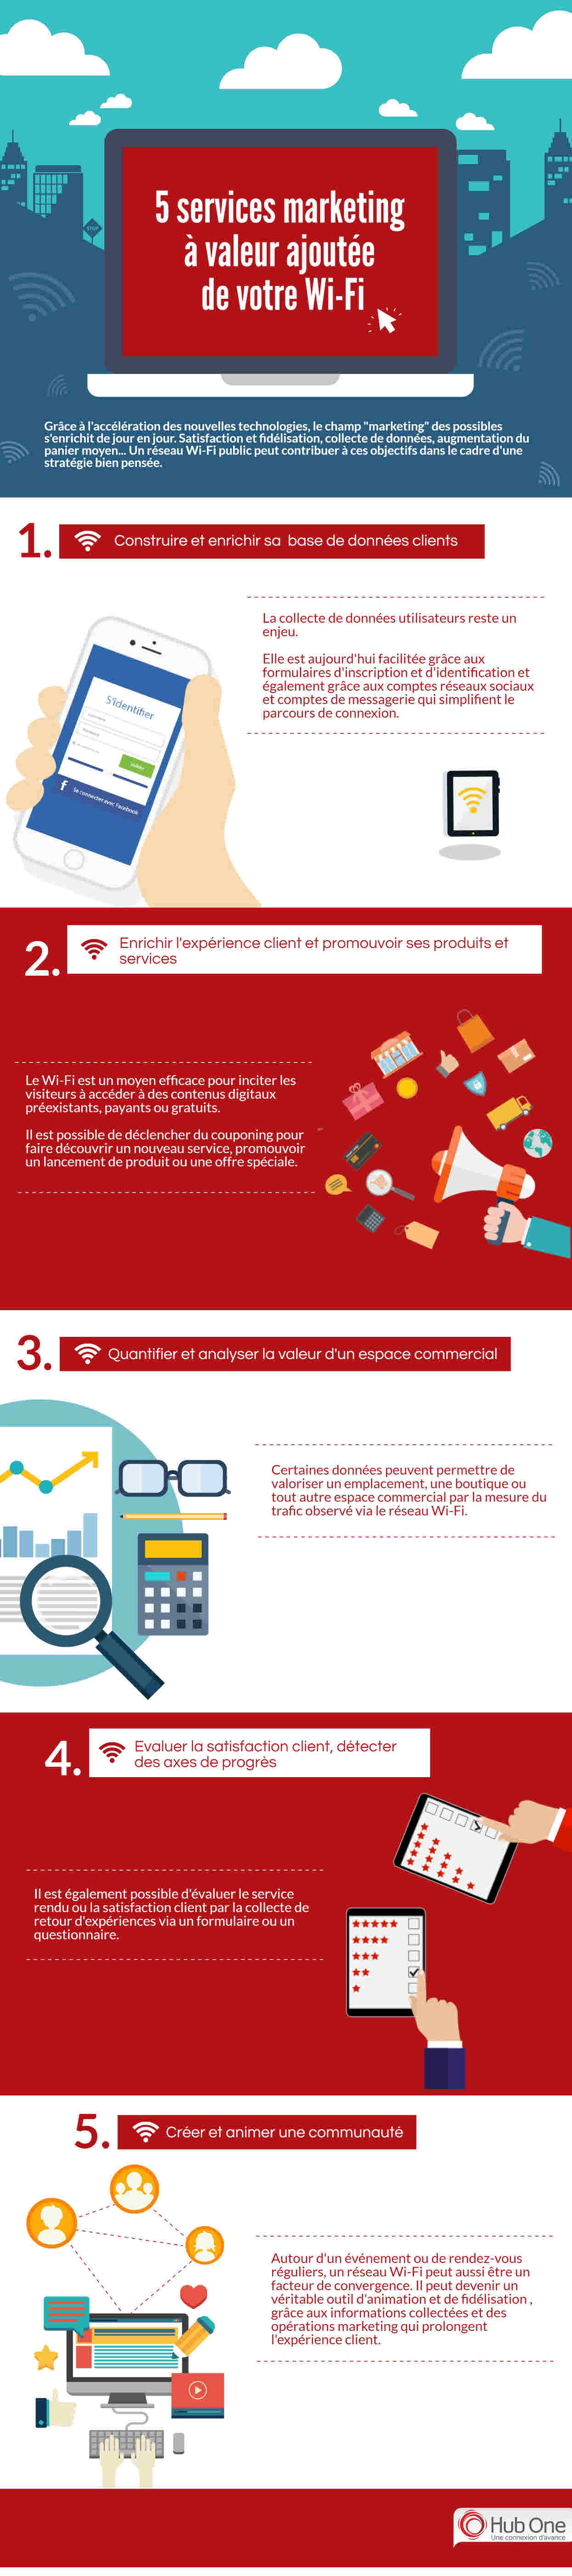 infographie_hub_one_wi-fi-page0